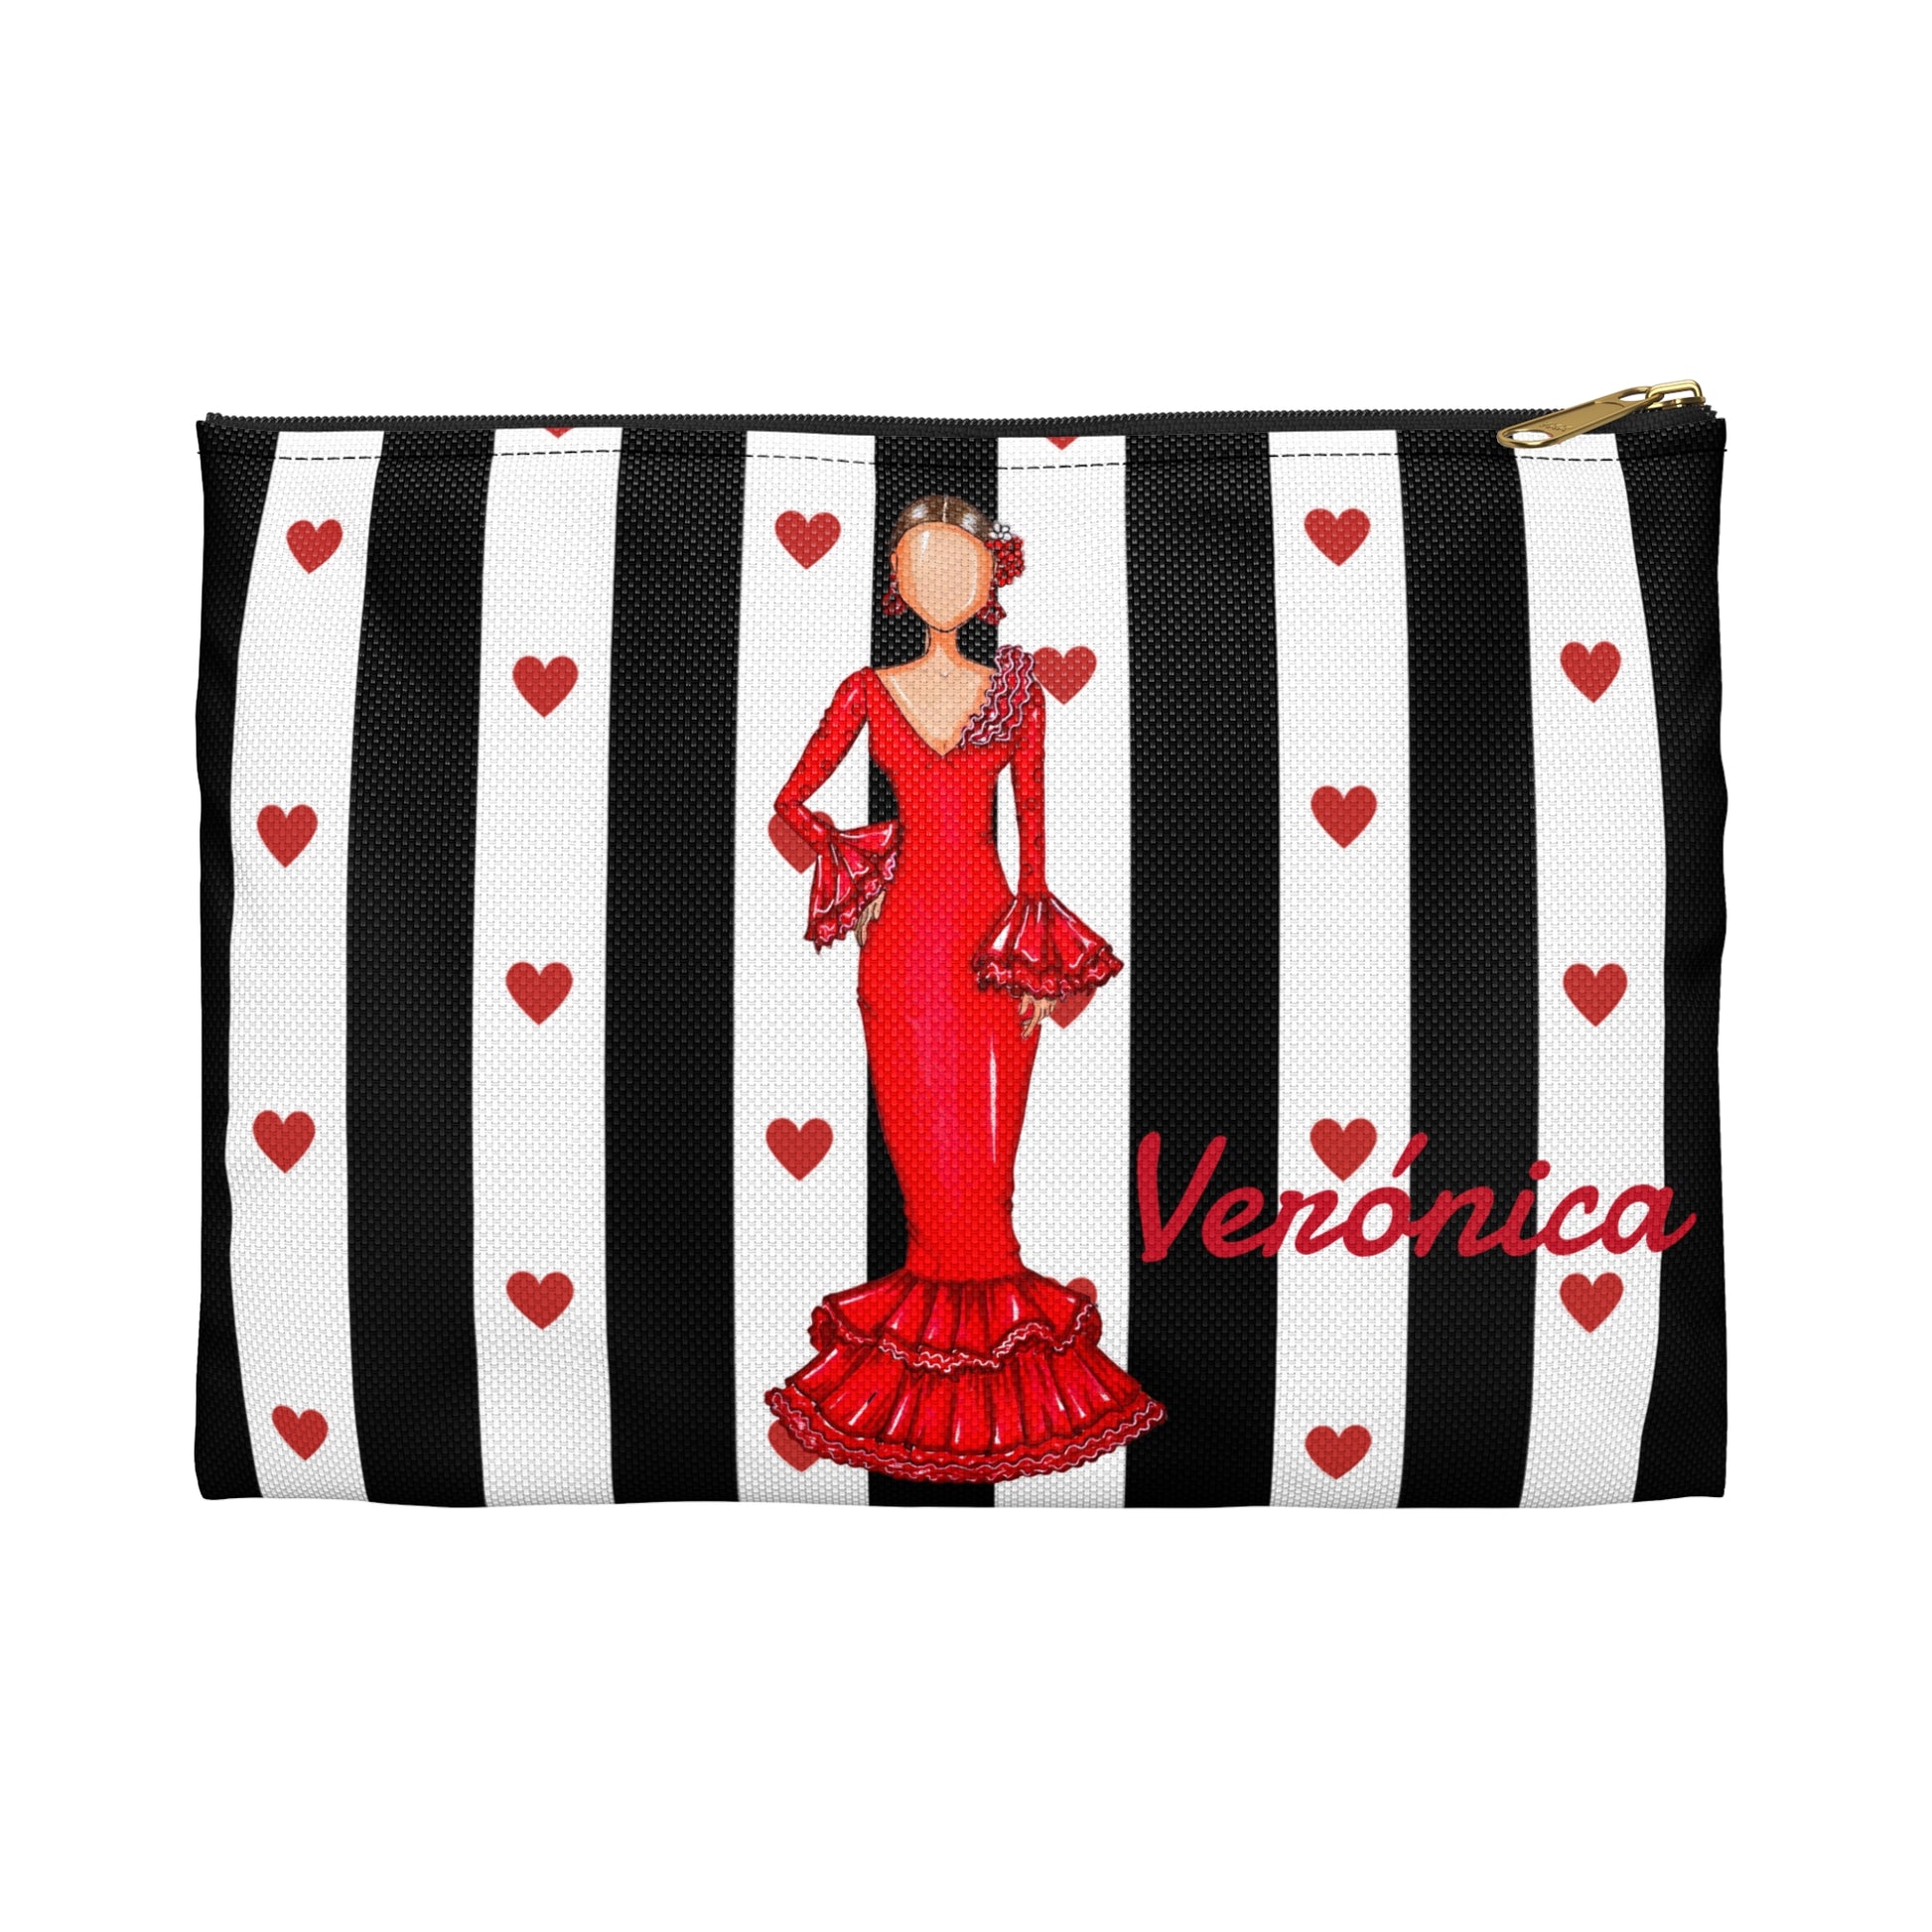 a black and white striped bag with a woman in a red dress